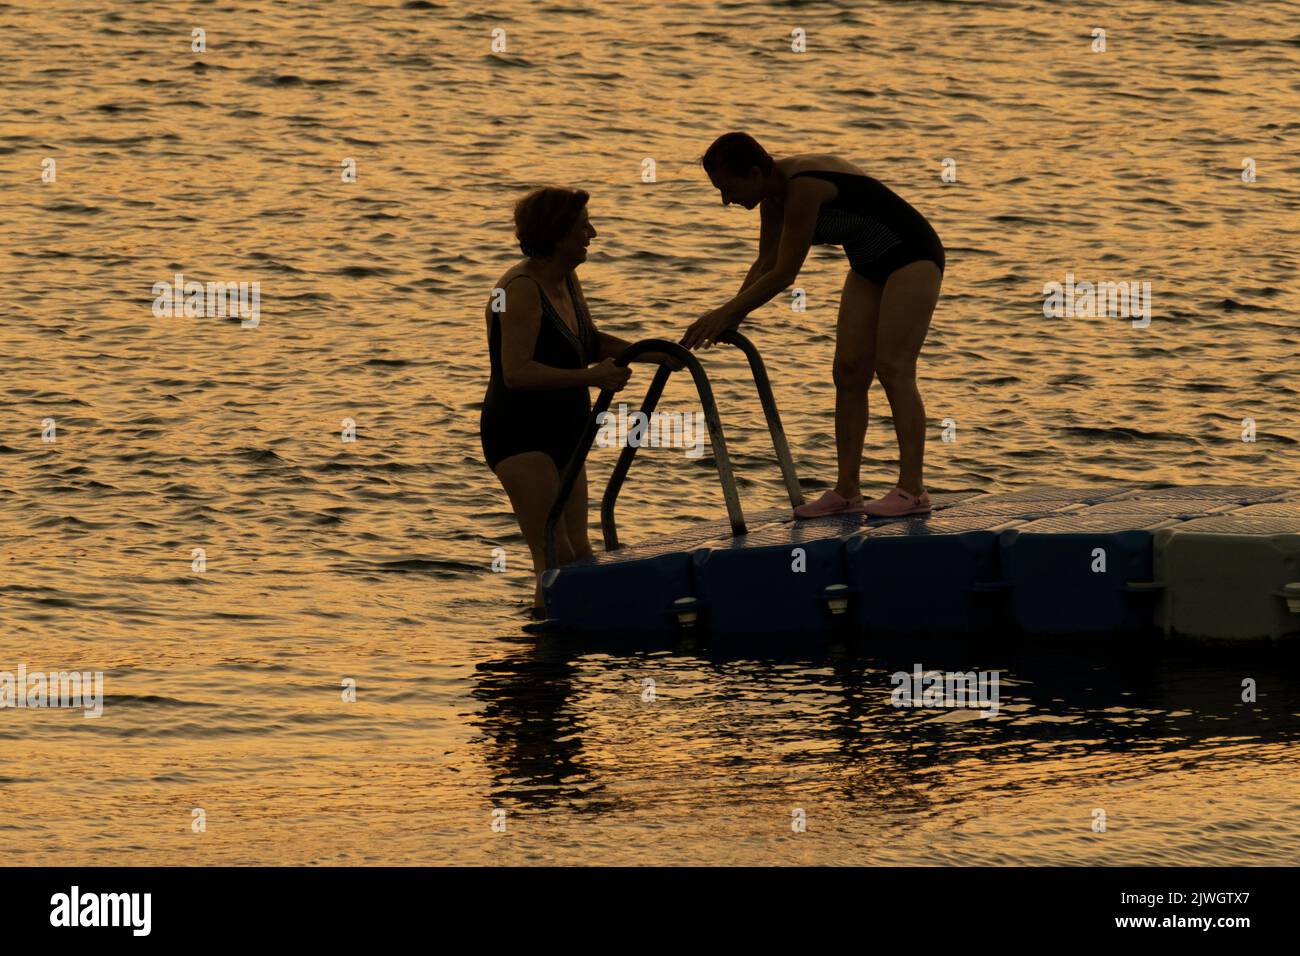 Two Ladies Swimming At Sunset At Aegean Sea. Stock Photo